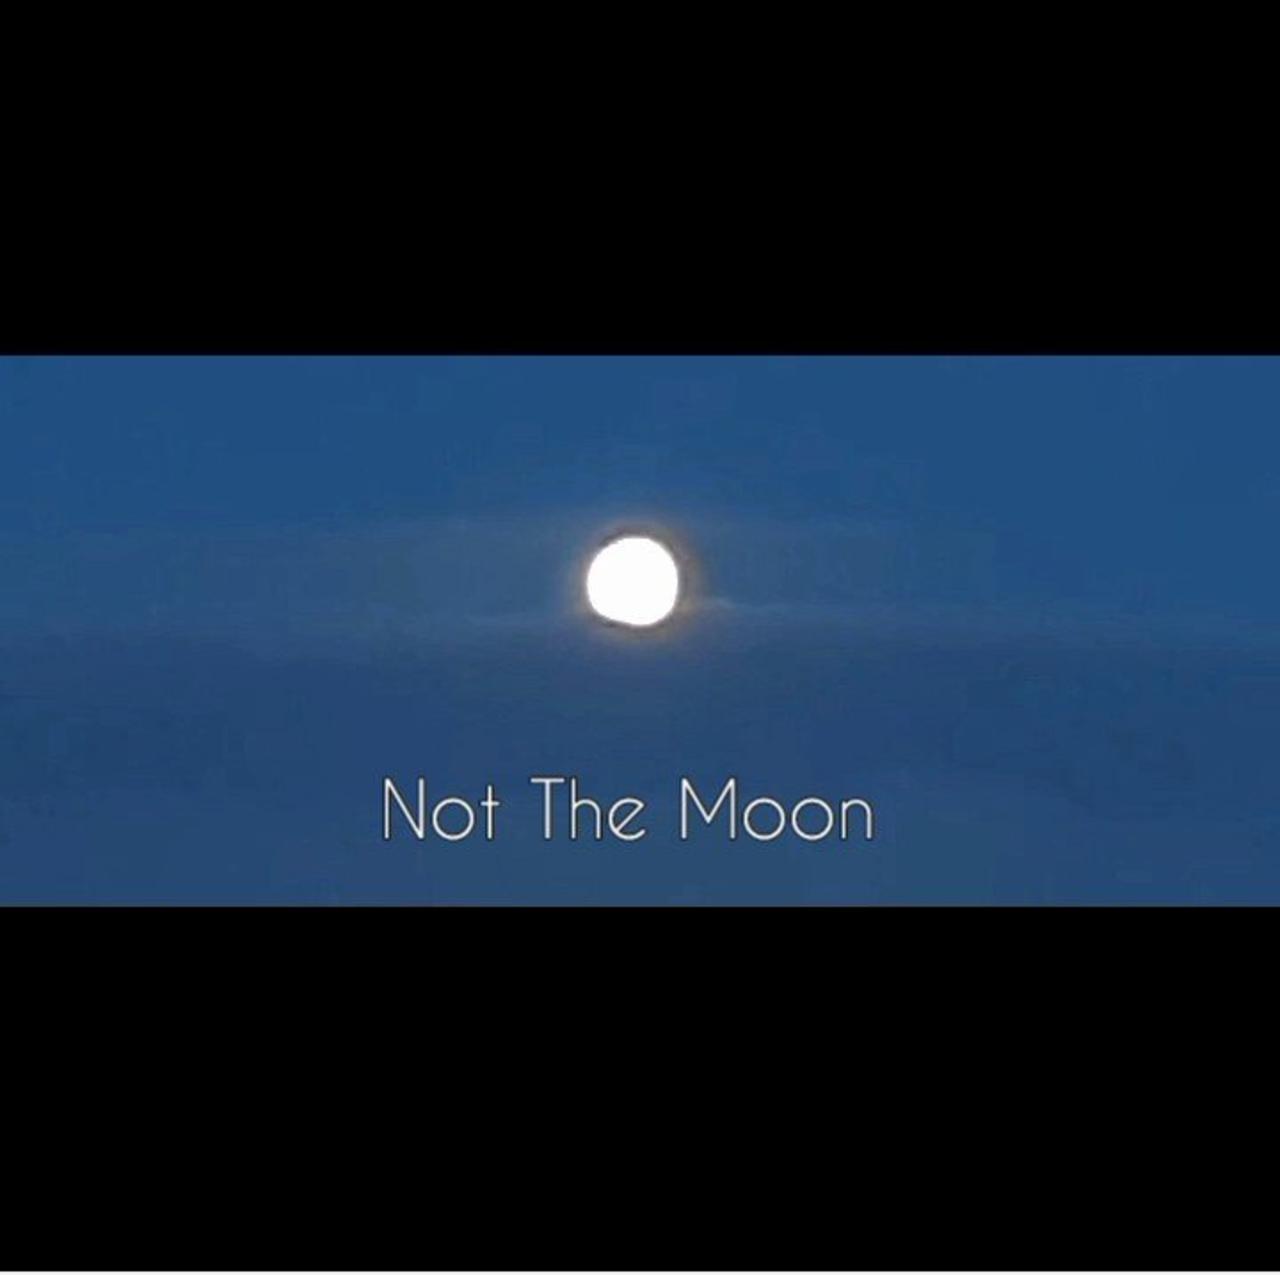 Not The Moon